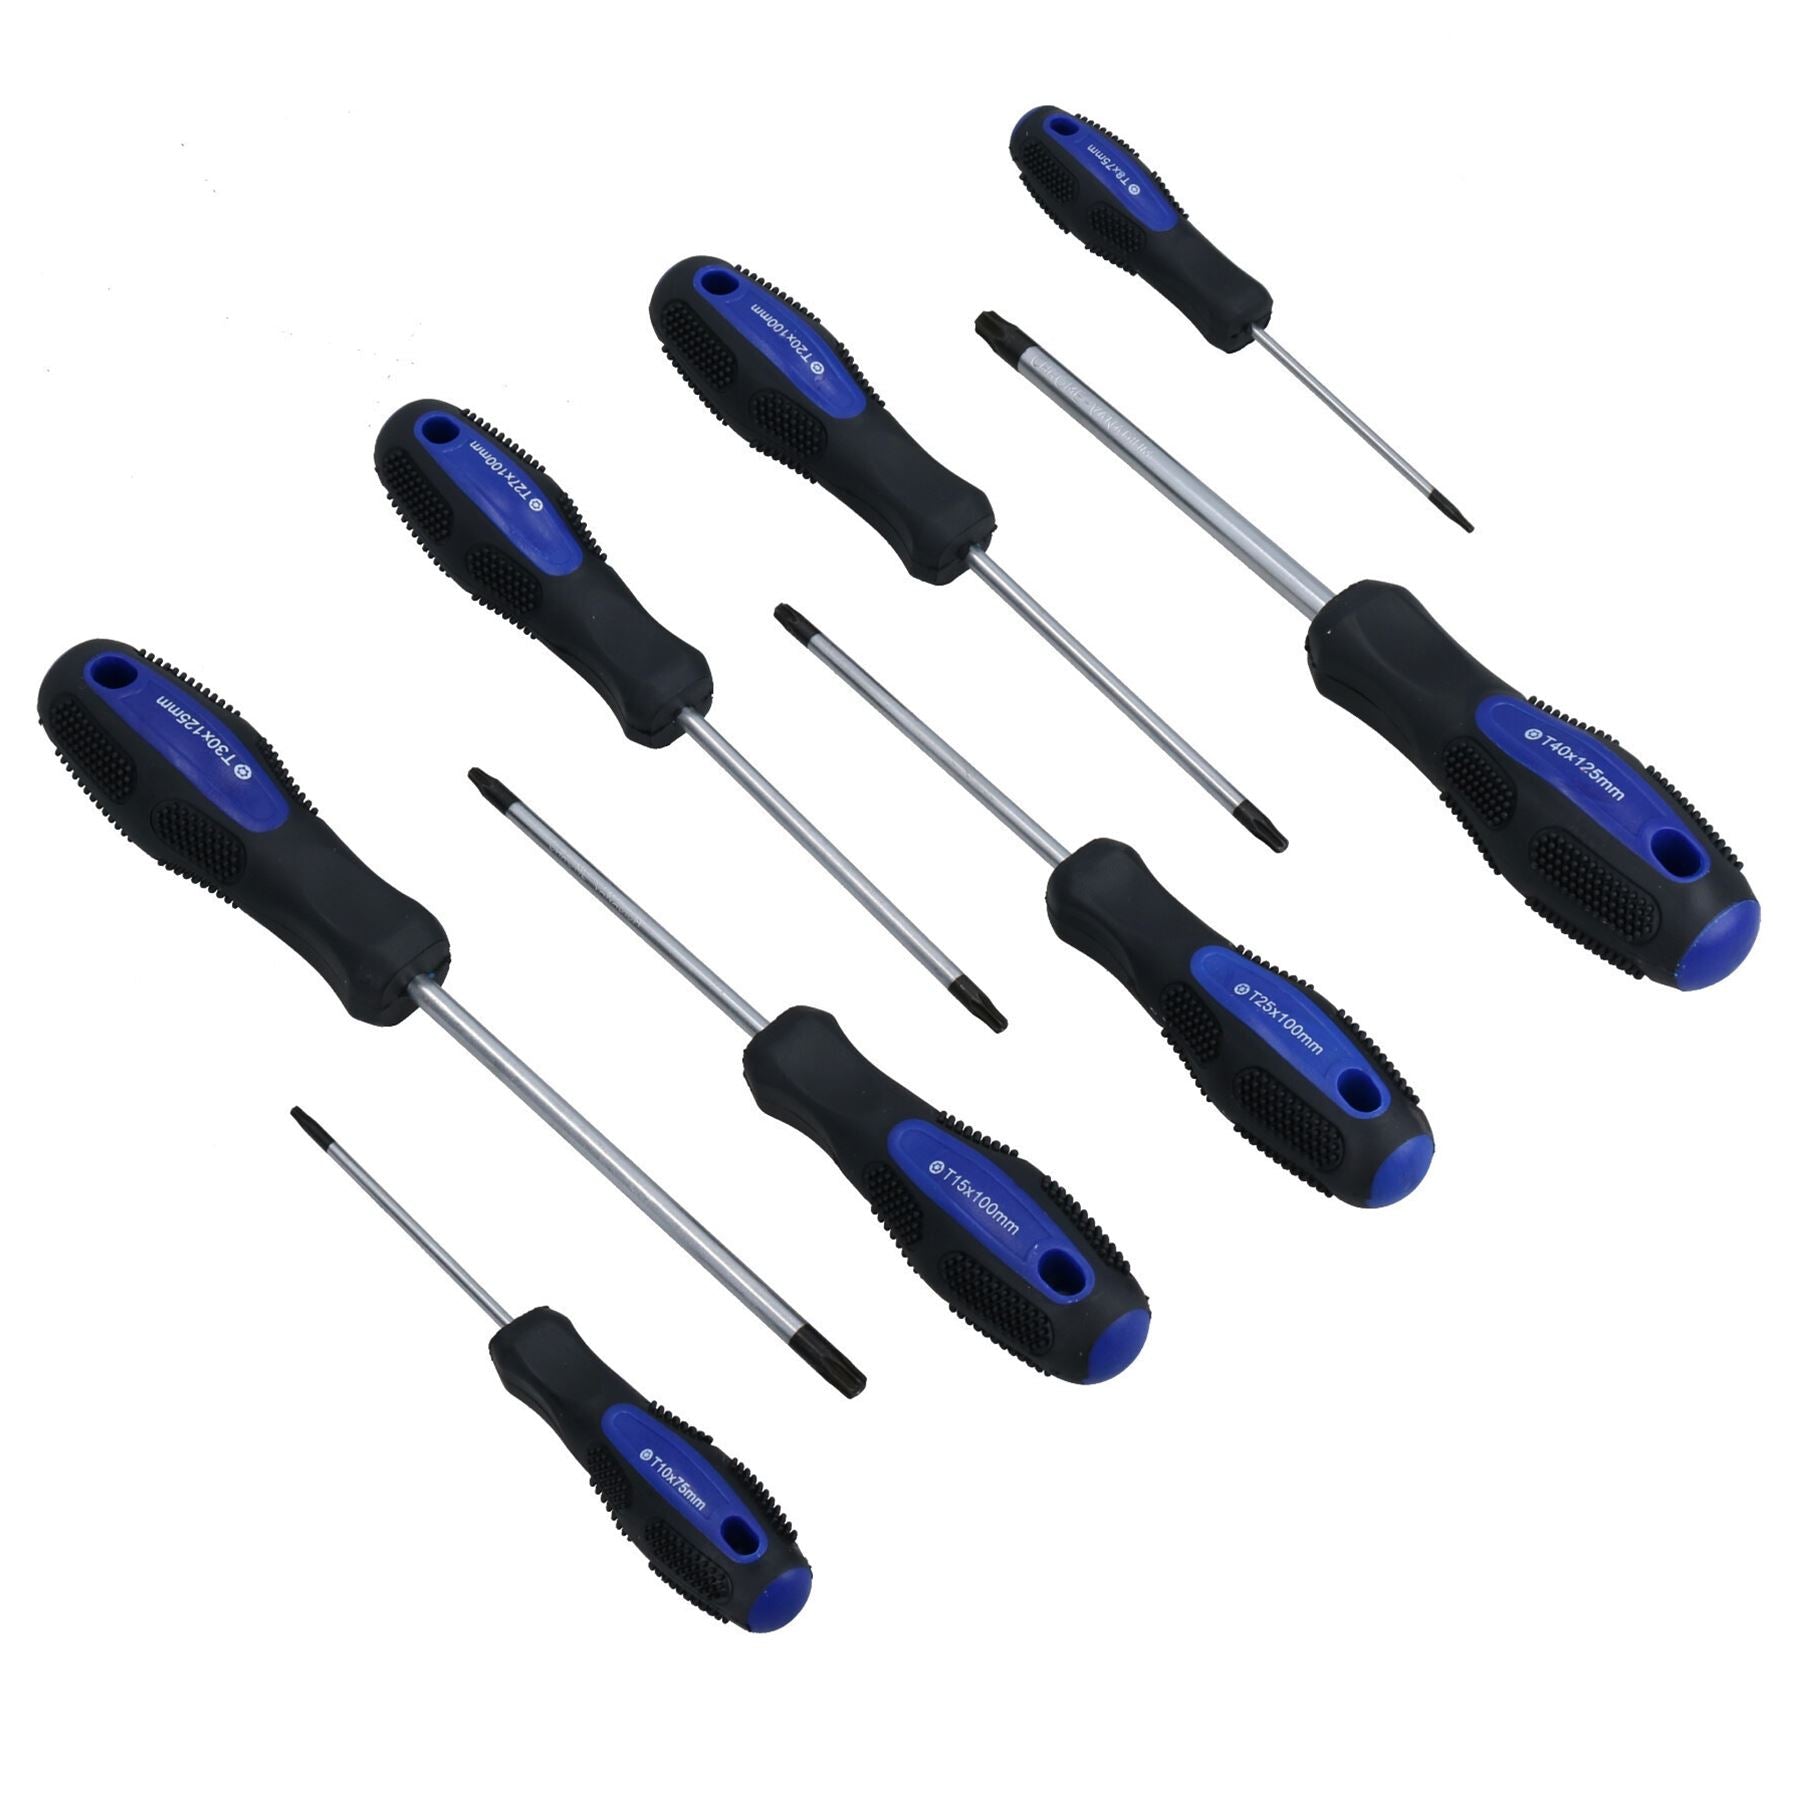 8pc Tamper Torx Star Screwdriver Set With Rubber Cushioned Grip T8 – T40